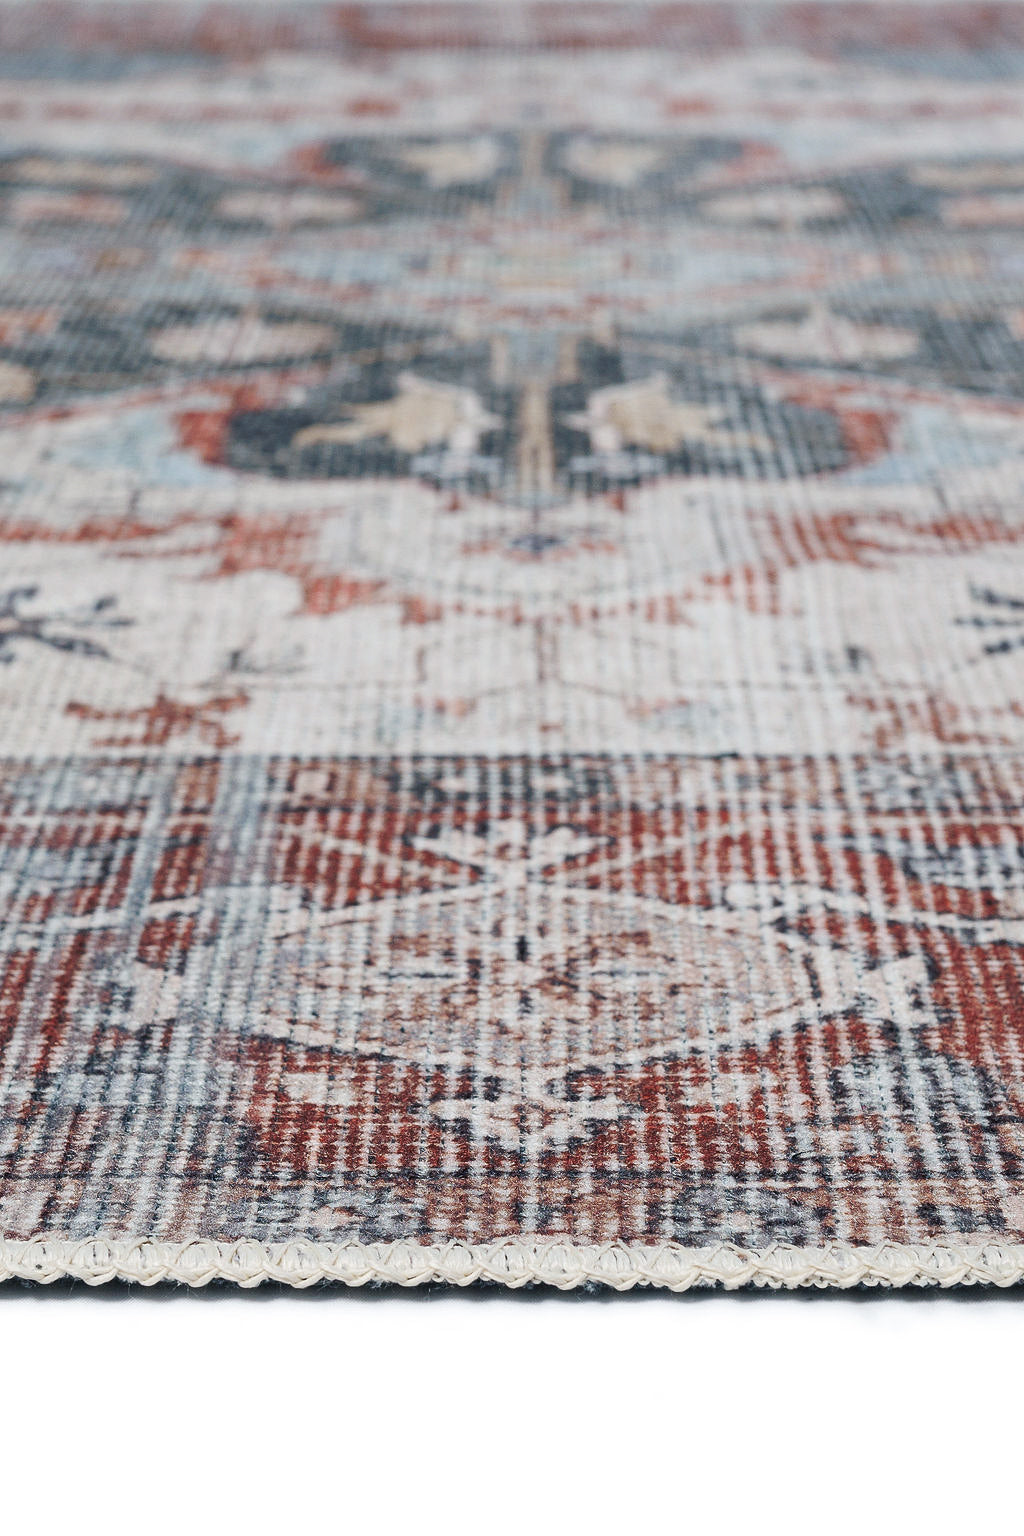 Bordered red and blue vintage style rug